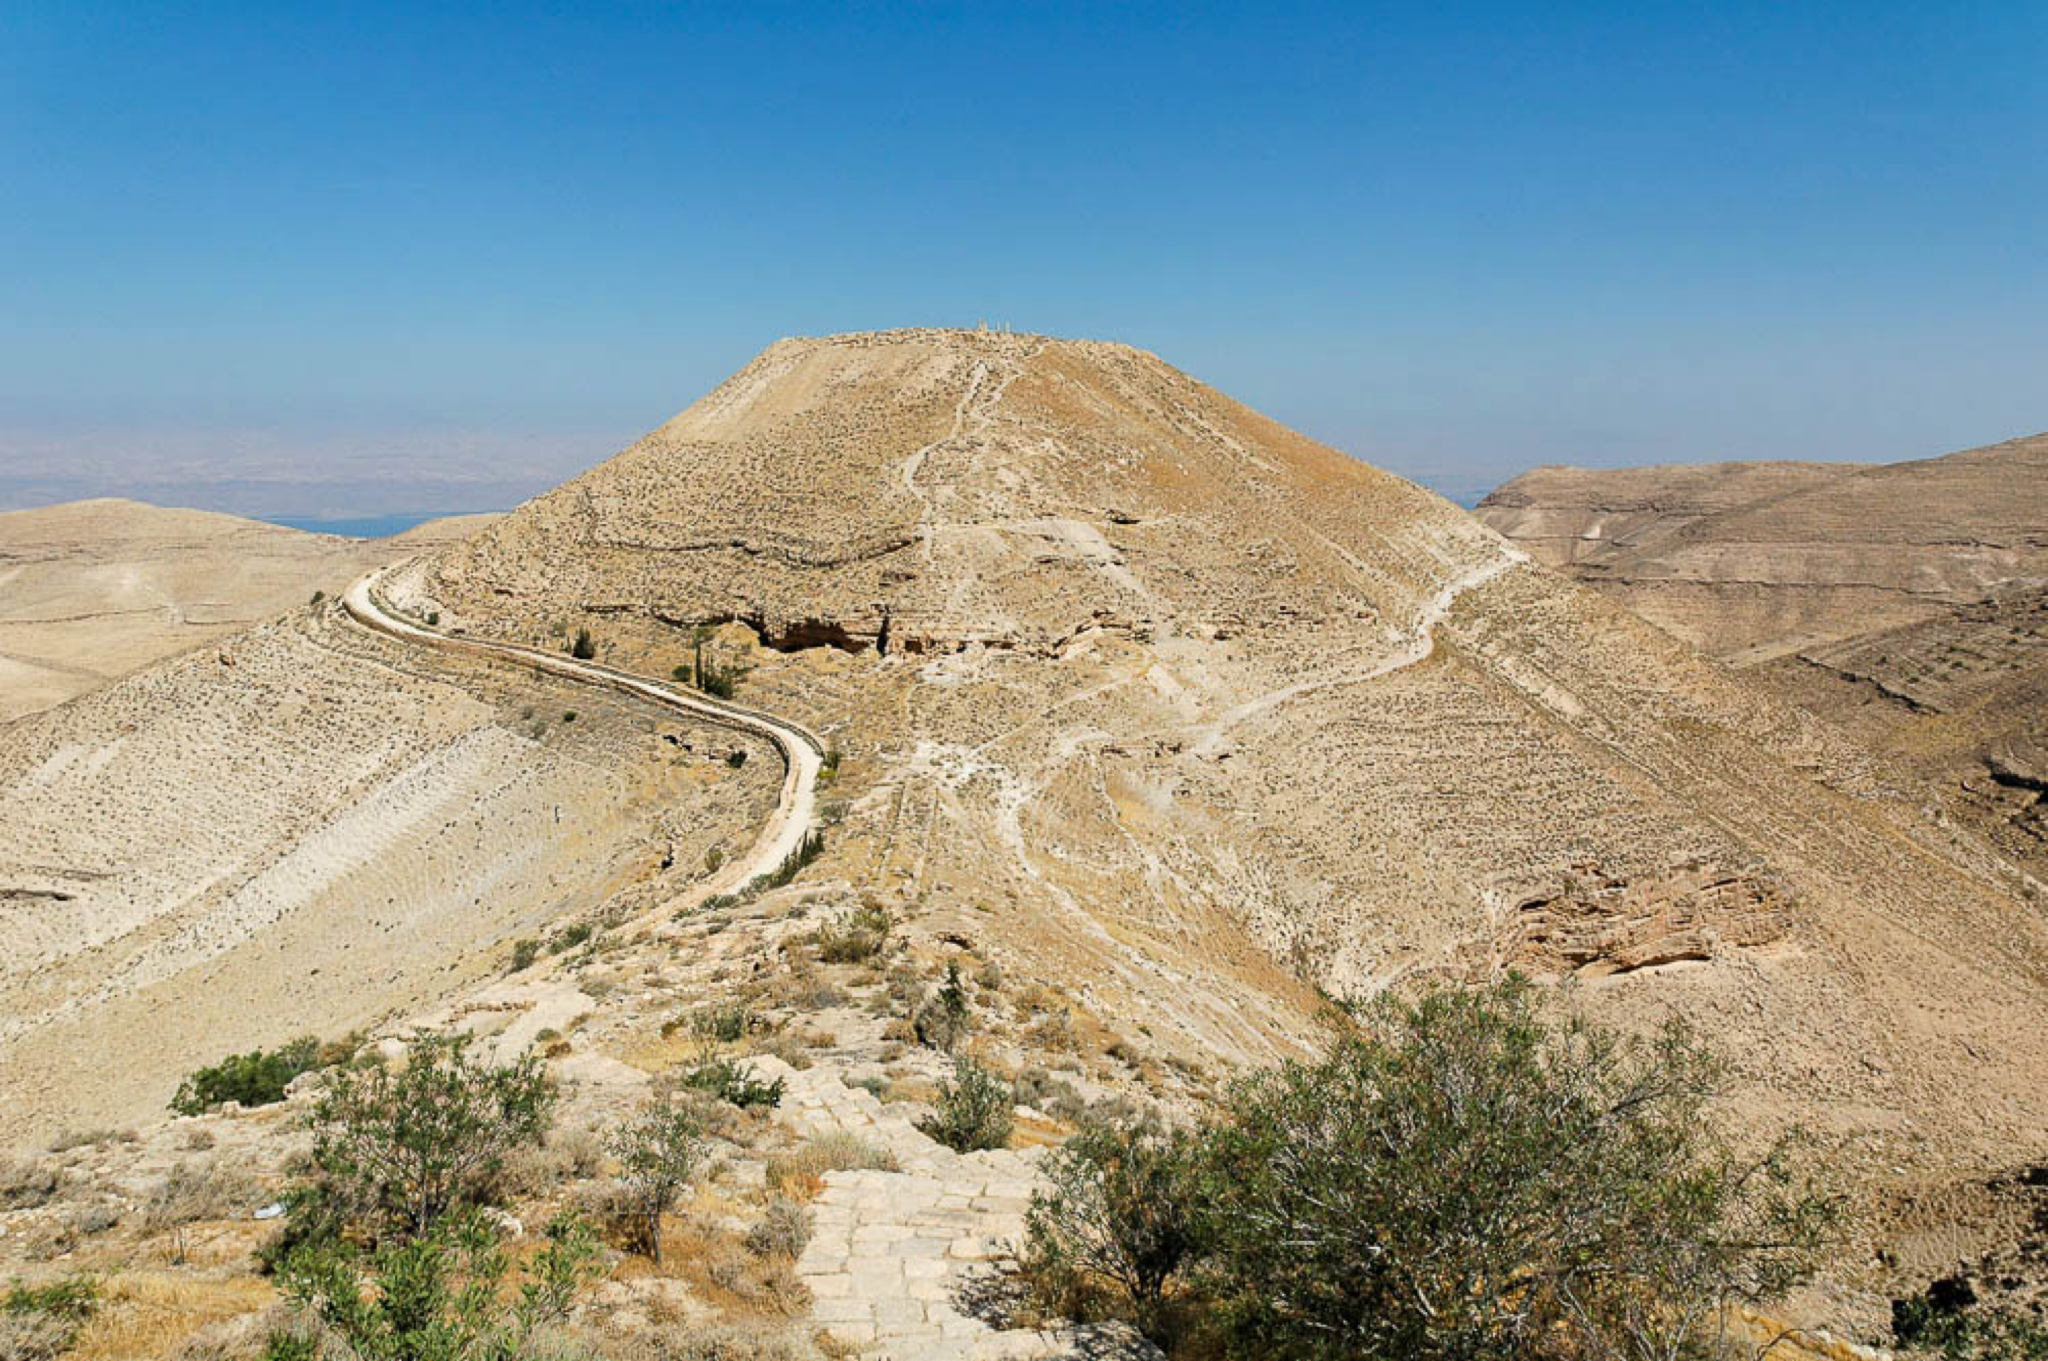 The fortress of Macherus was built by Herod the Great and inherited by his son Antipas, who ruled over Galilee and Perea. Macherus is in modern Jordan.